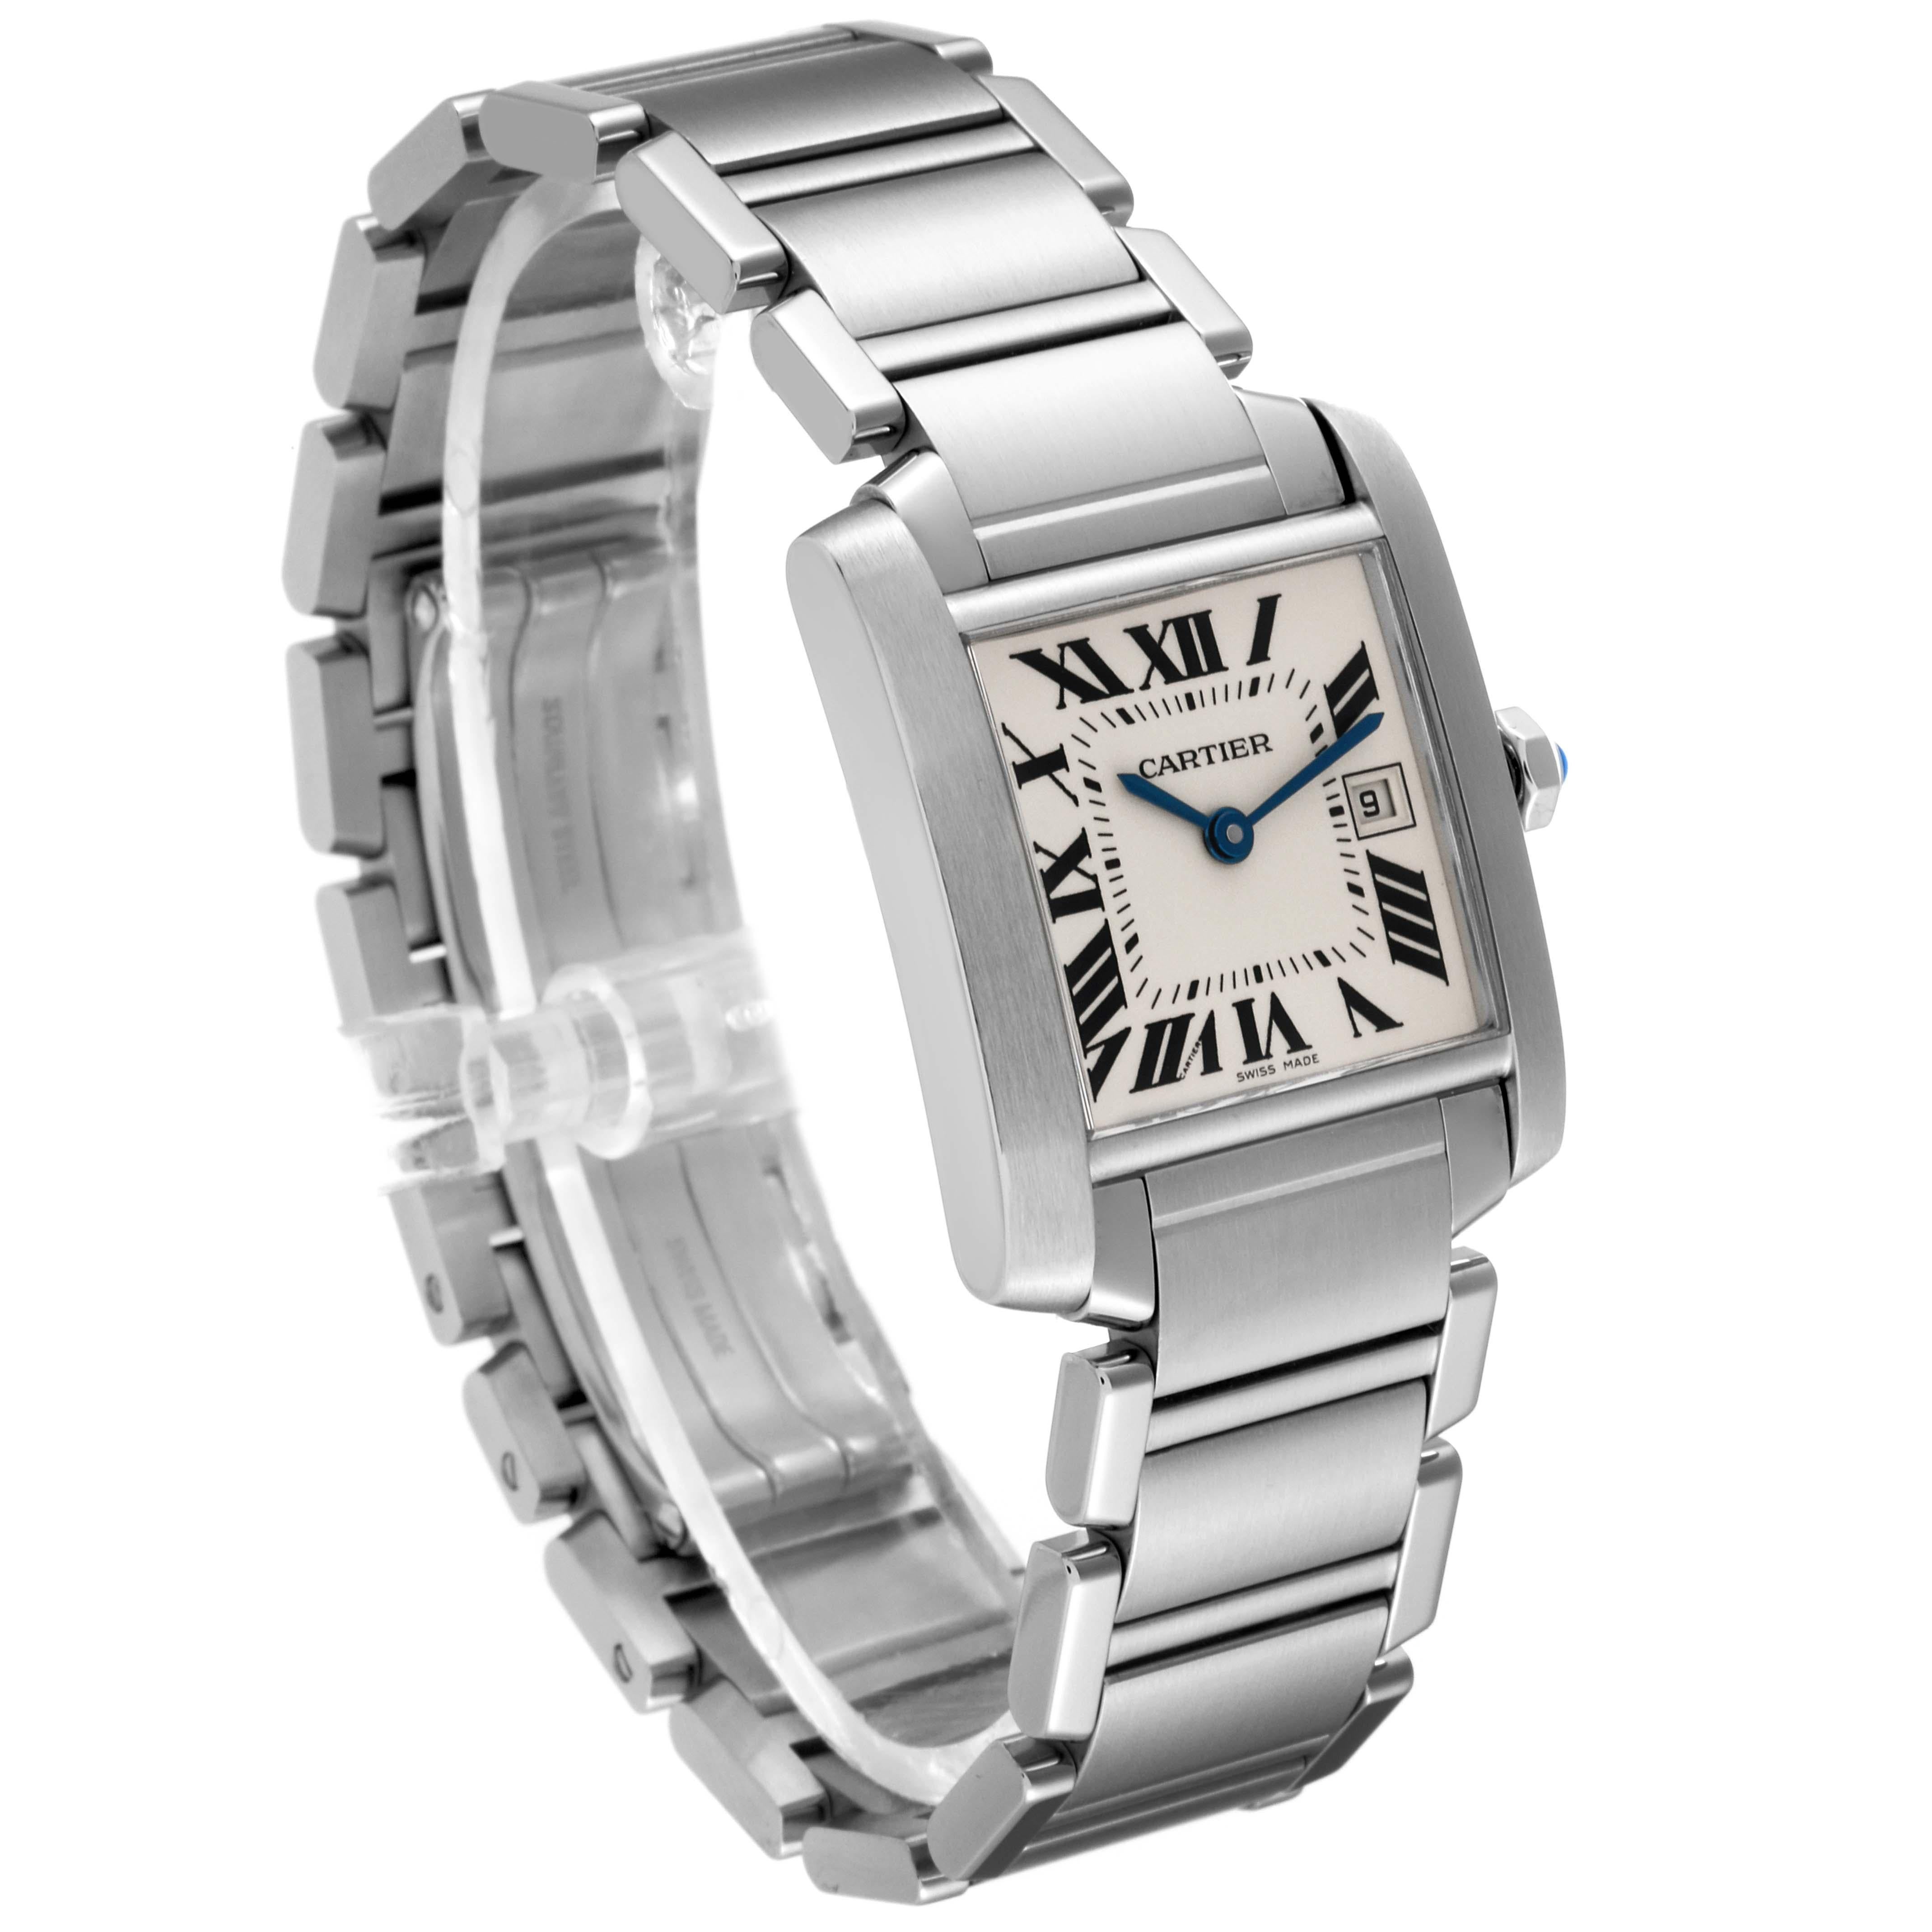 Women's Cartier Tank Francaise Midsize Steel Ladies Watch W51011Q3 Box Papers For Sale